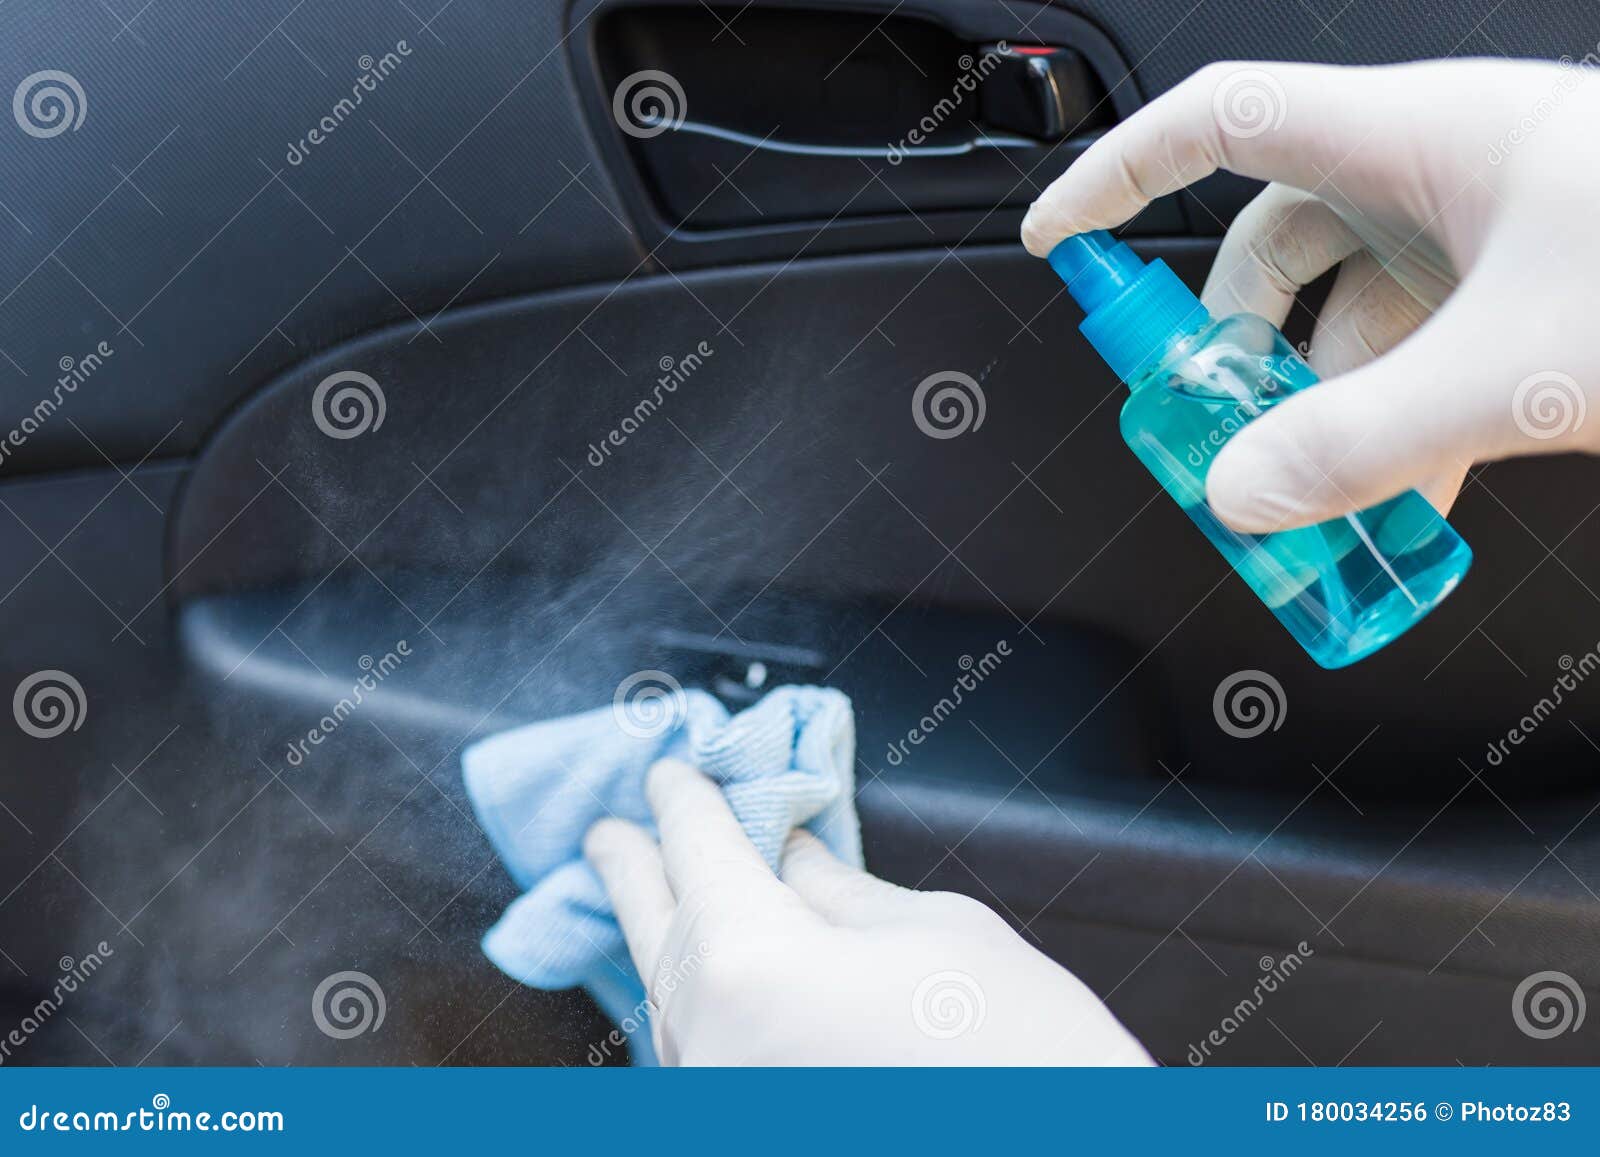 He clean the car. How to remove Paint from car.